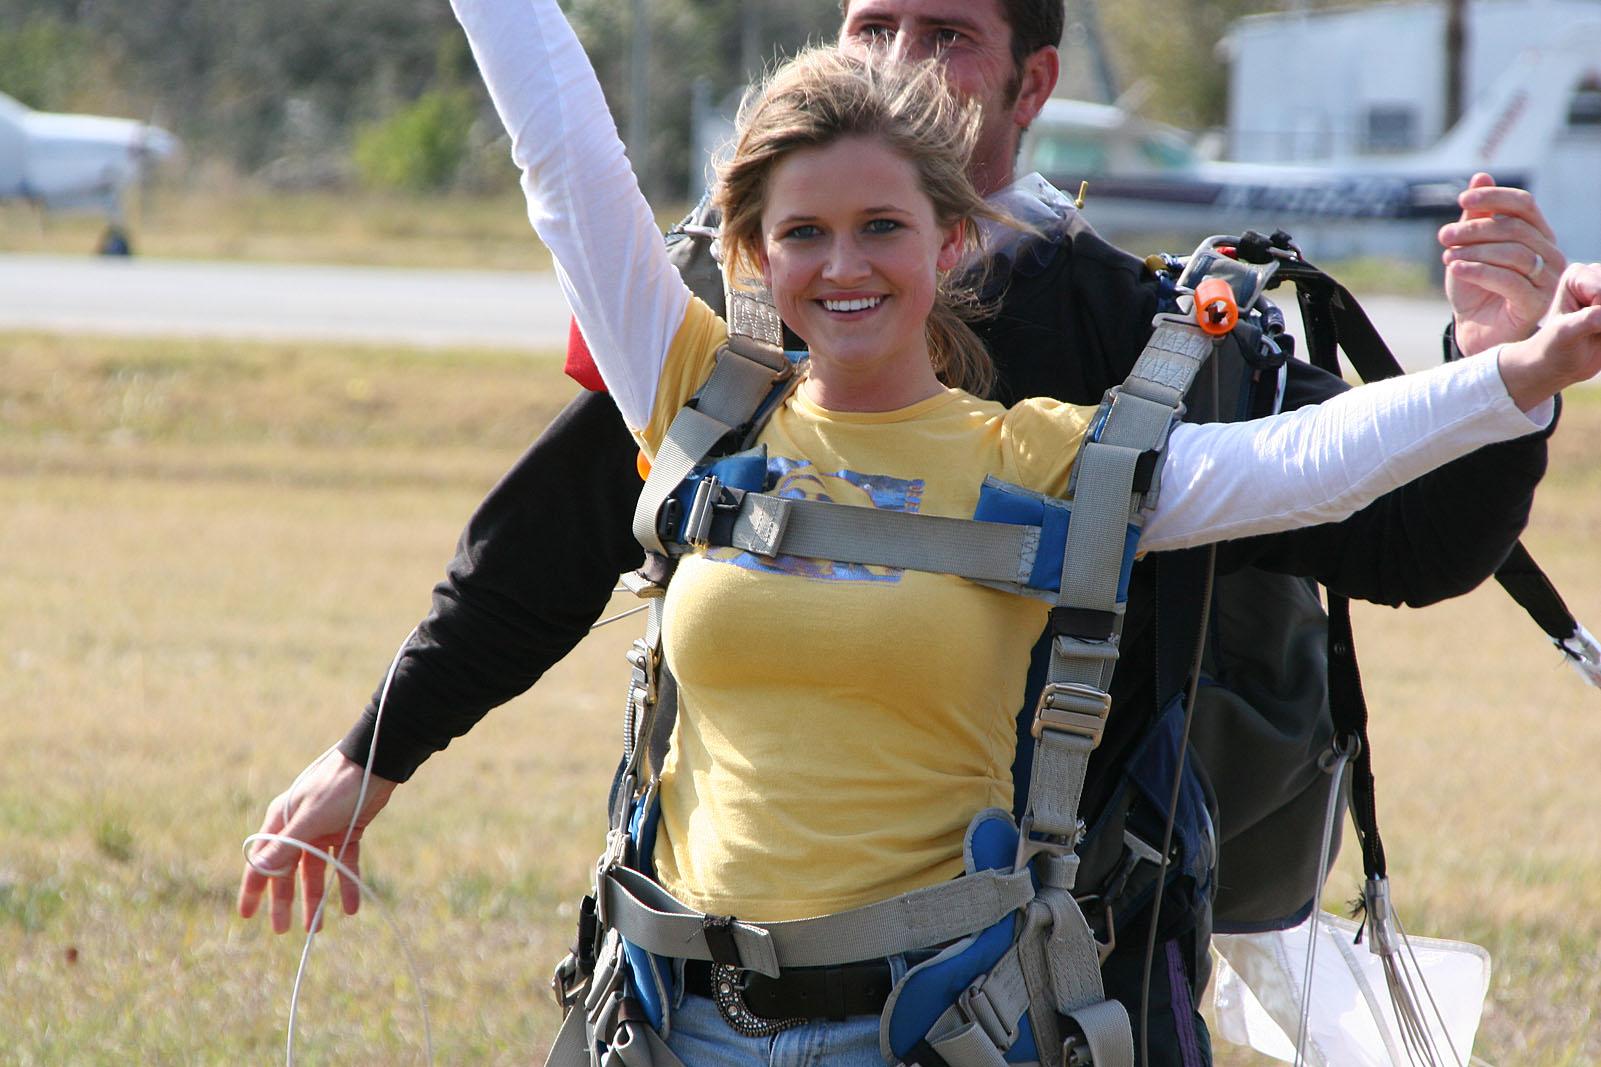 Pictures of Samantha Gauge and Brooke Skye going sky diving #53558248